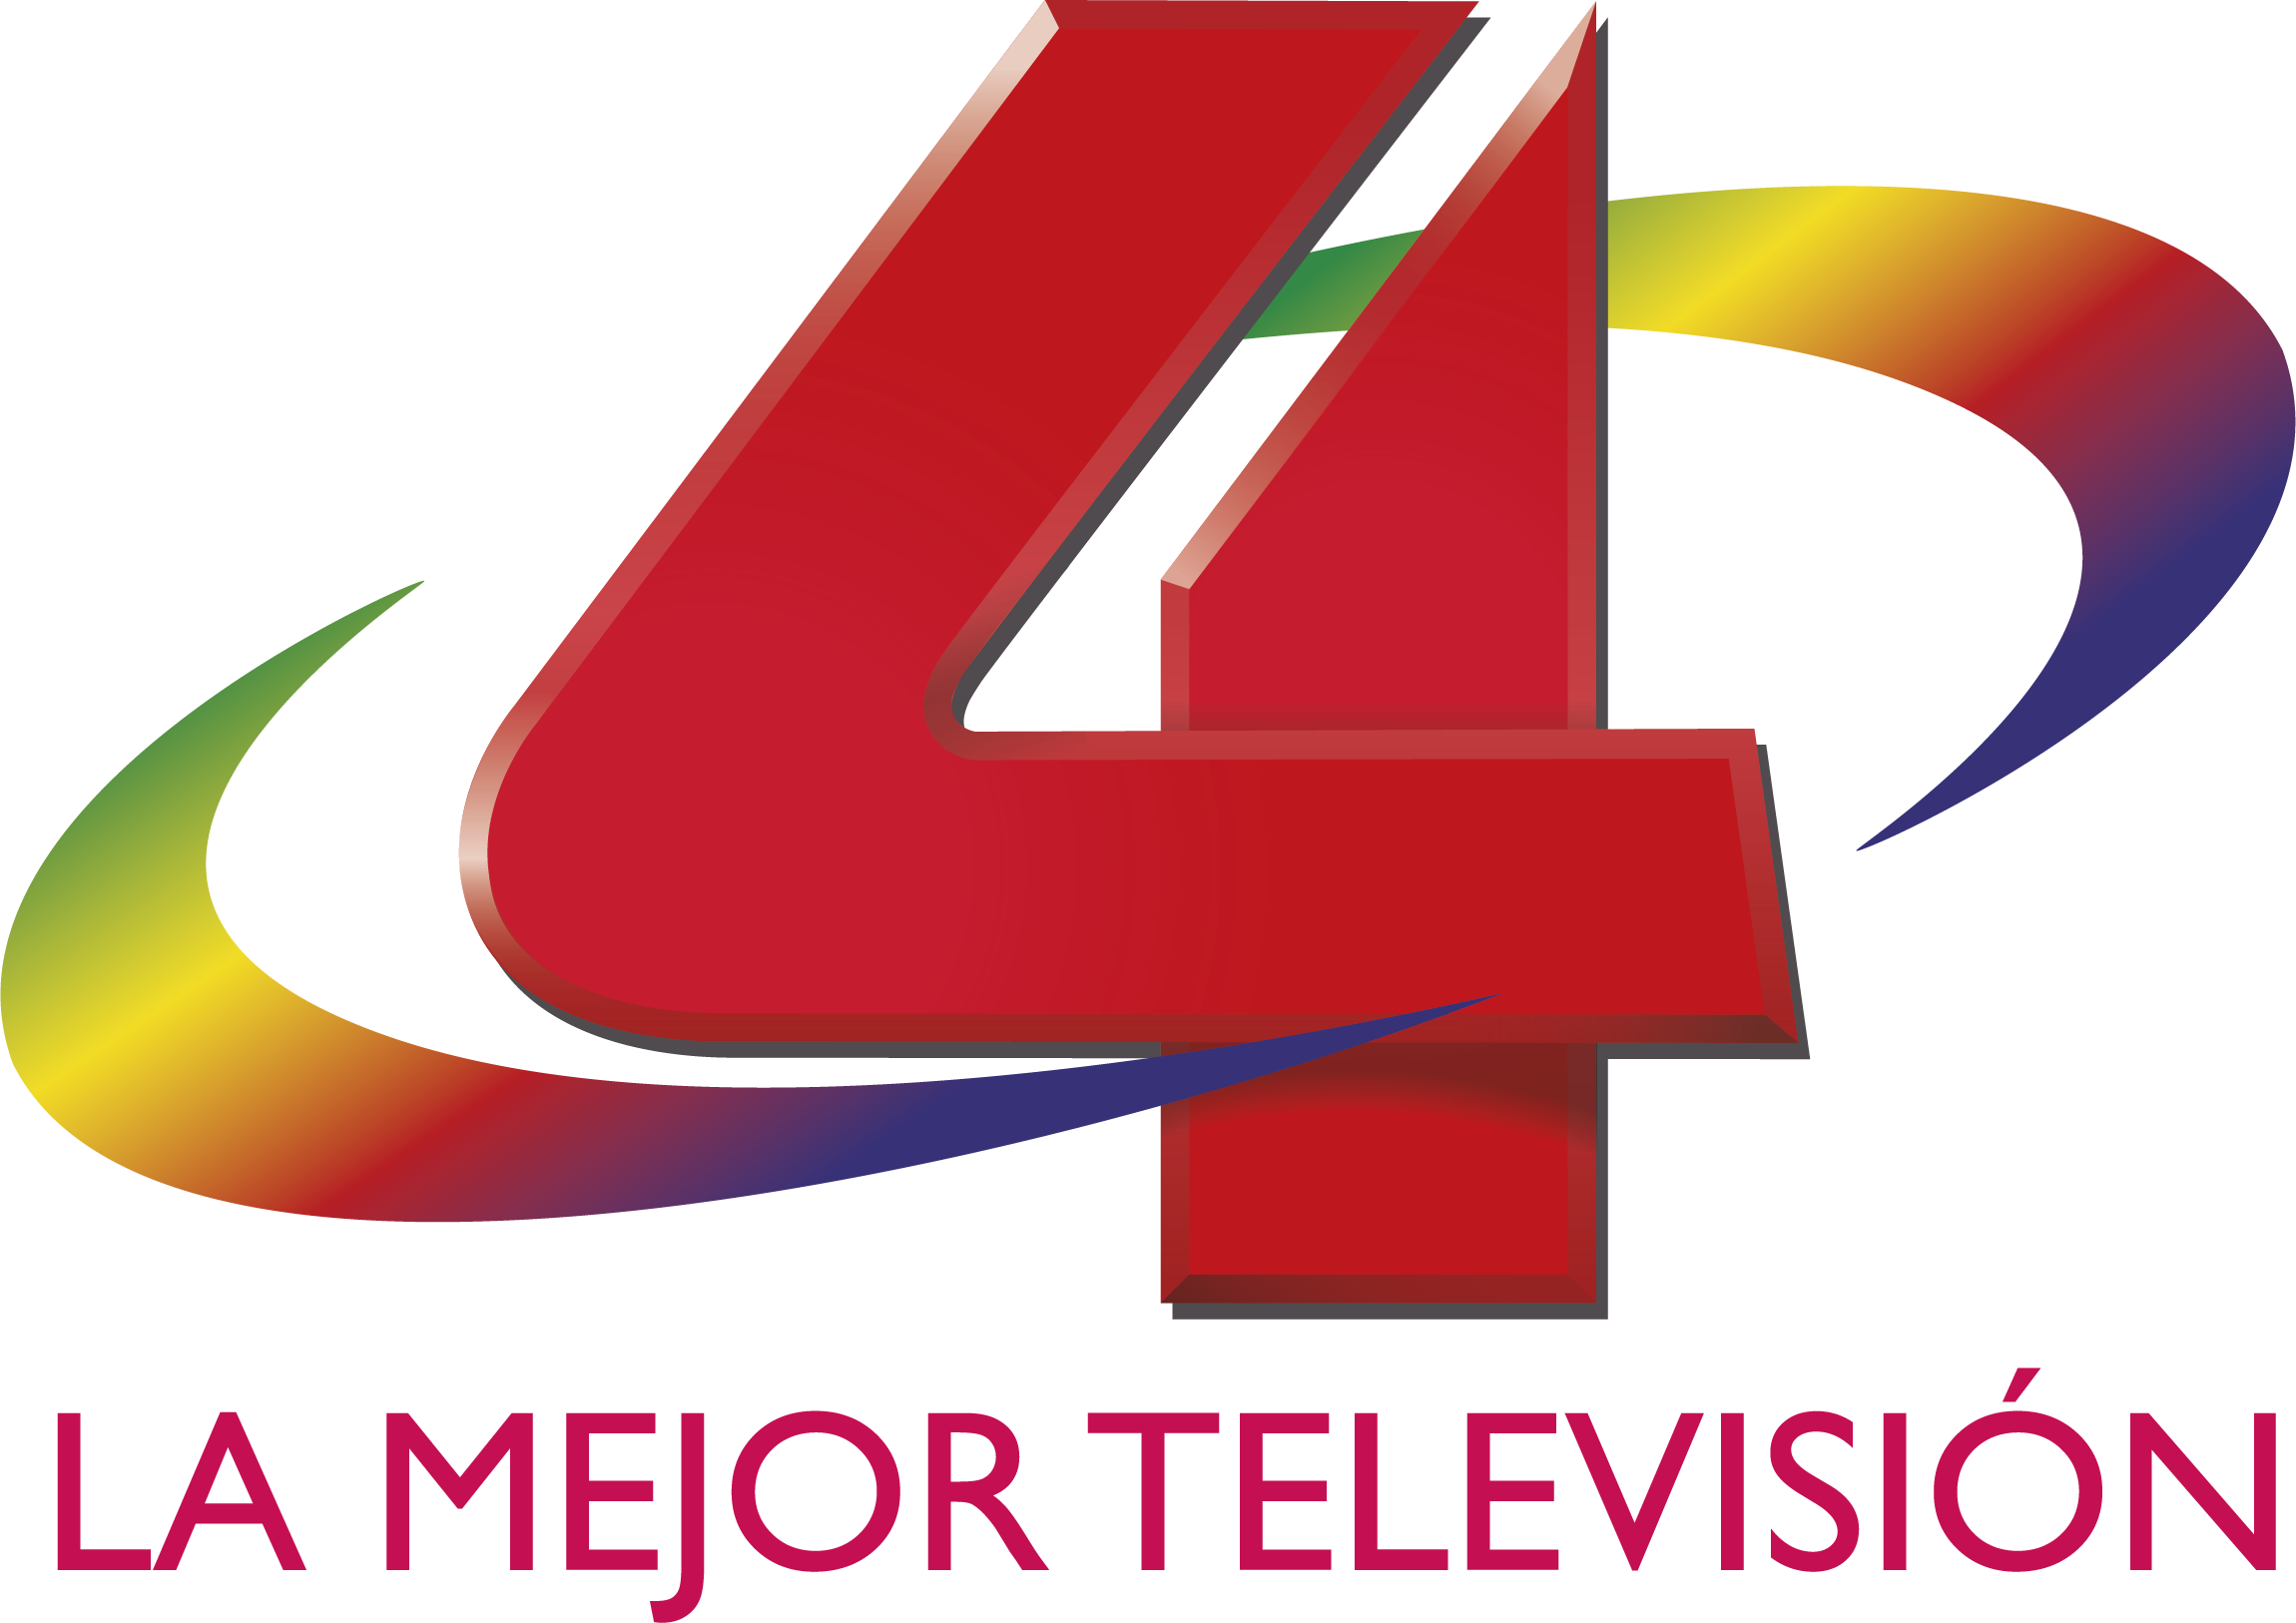 Canal 4 (Nicaraguan TV channel) - Wikipedia